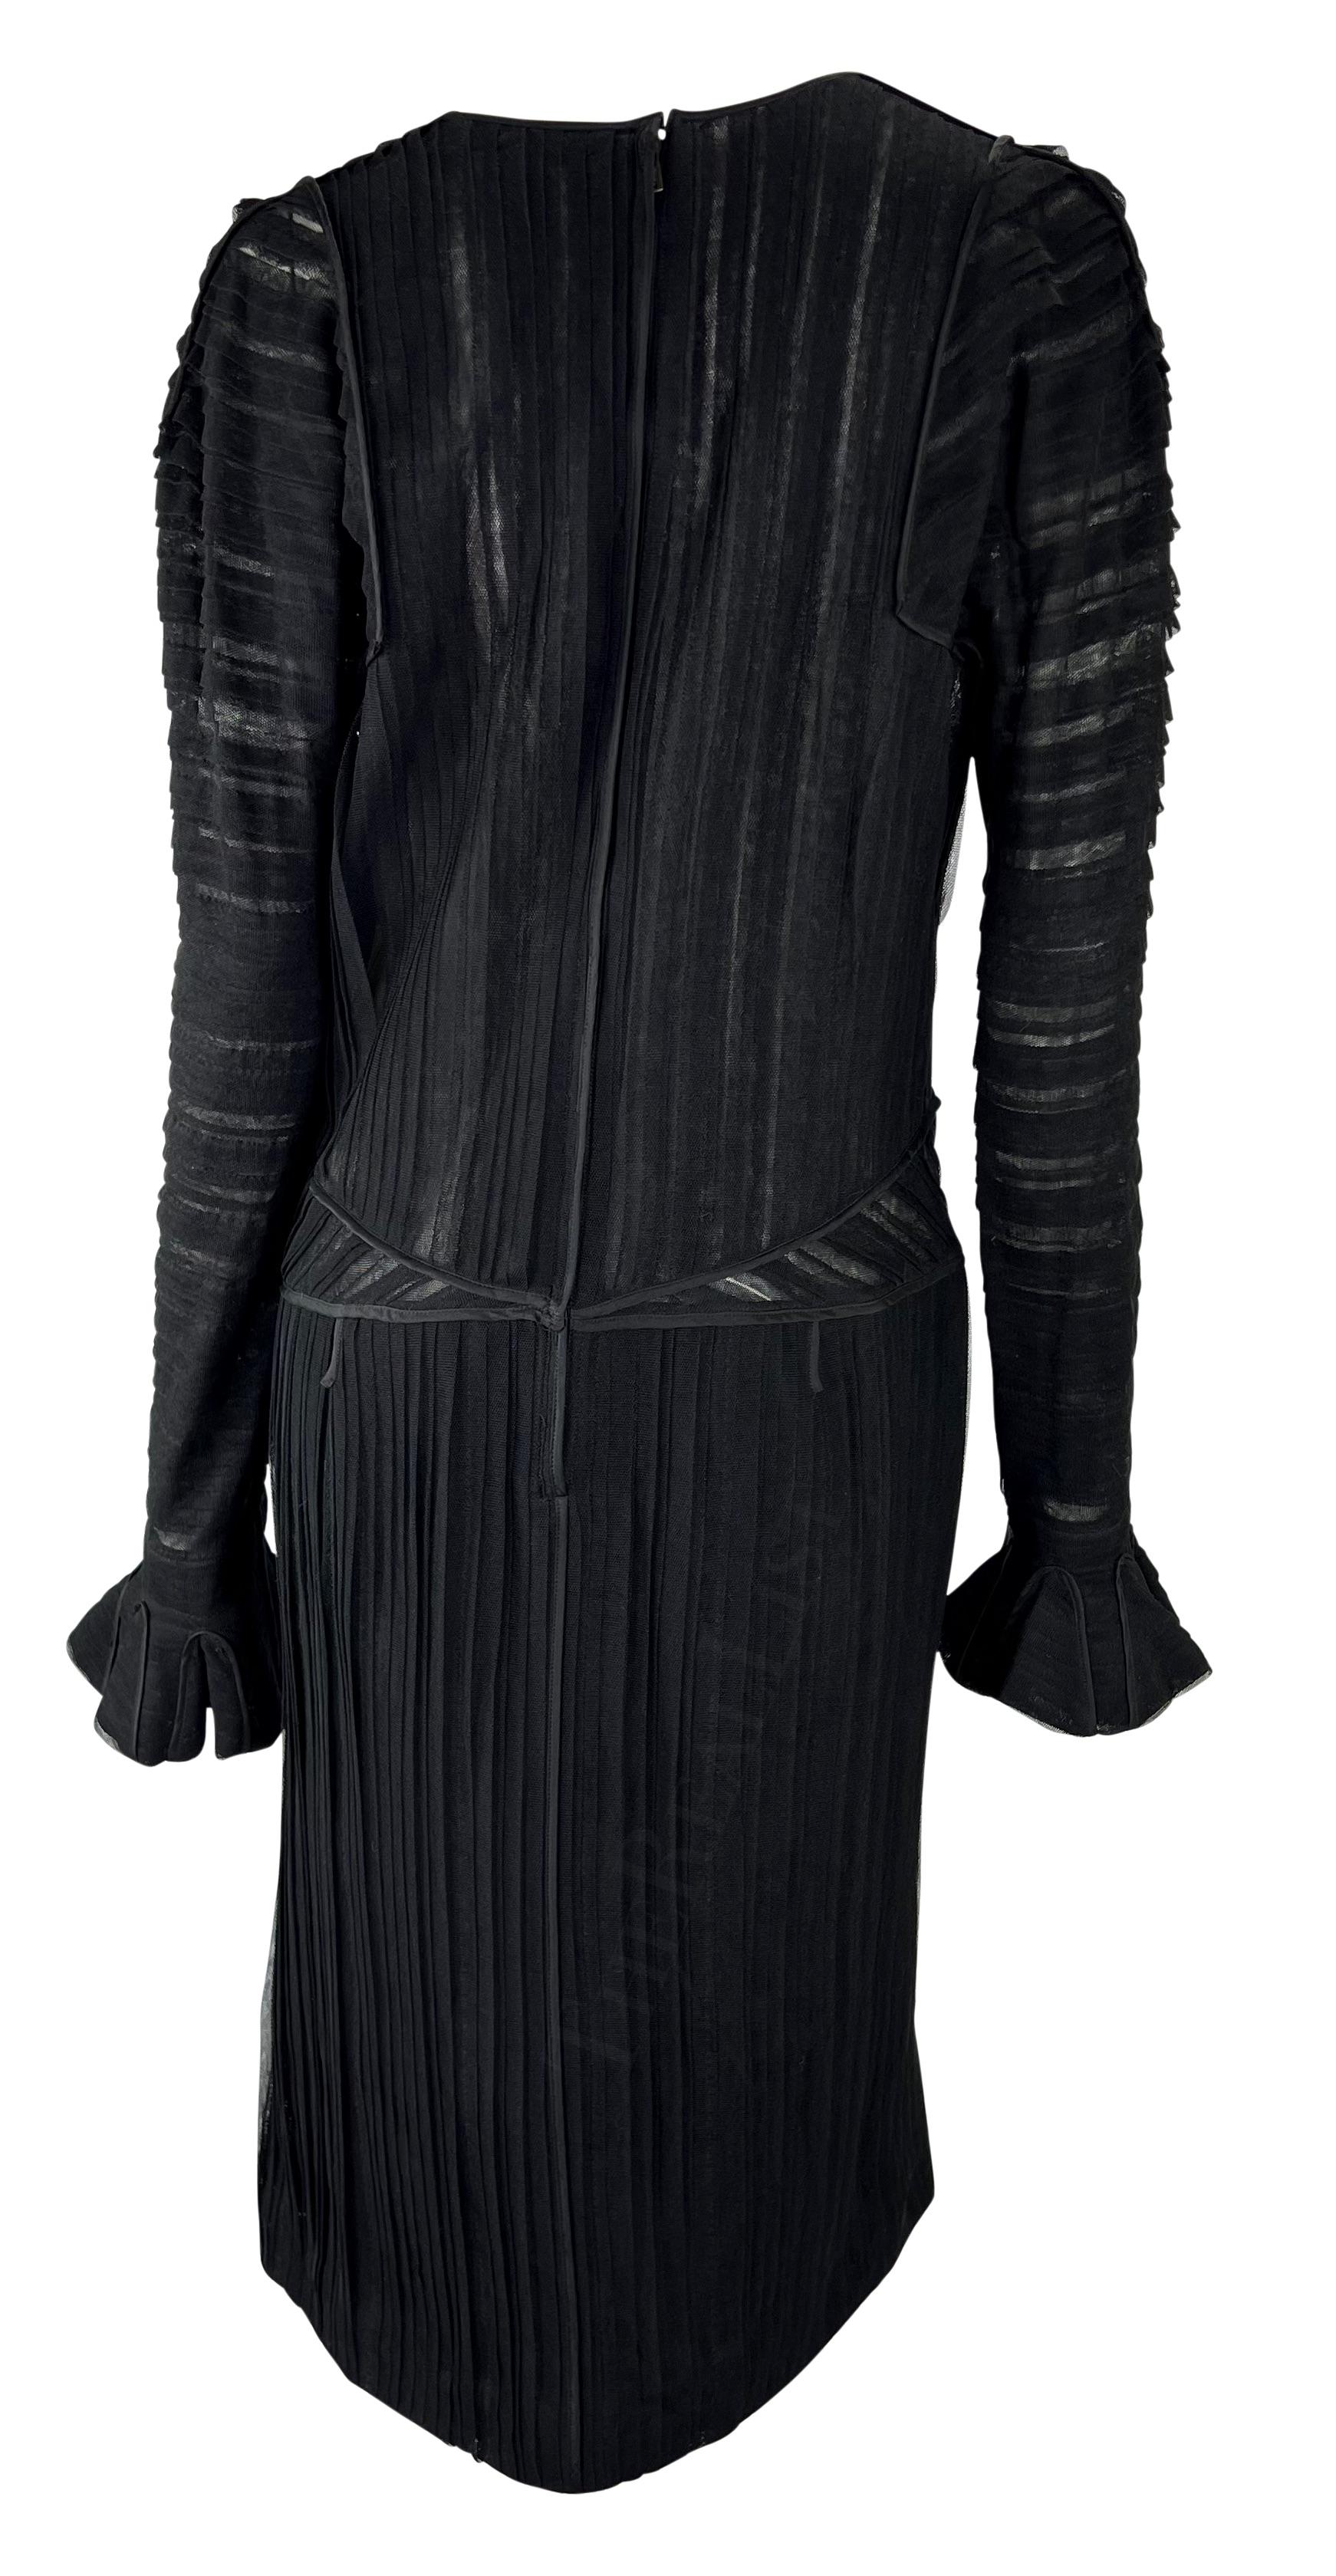 Women's F/W 2002 Yves Saint Laurent by Tom Ford Black Tulle Plunging Runway Dress